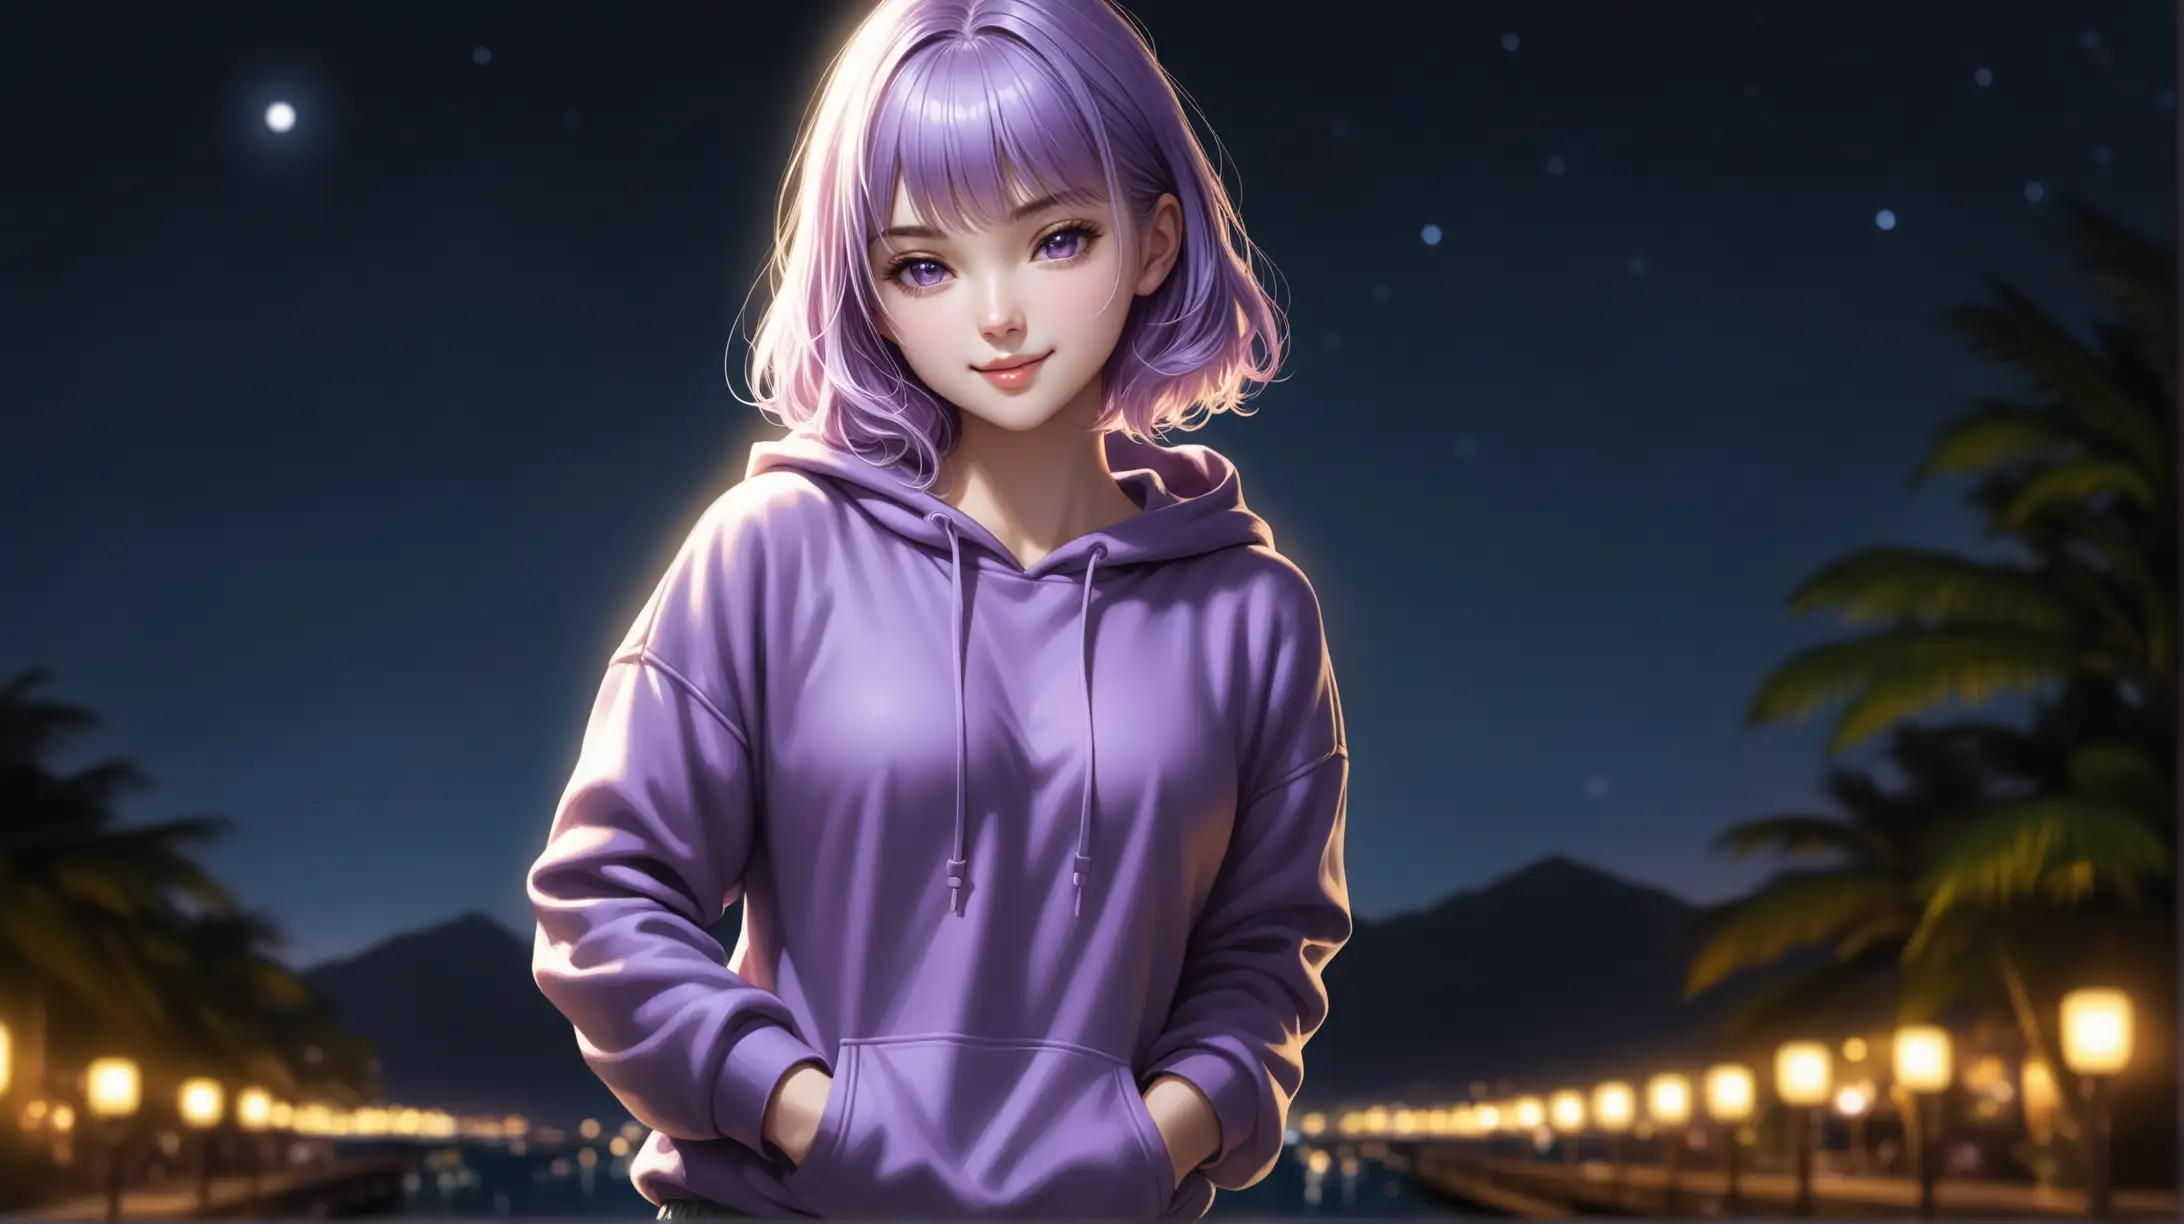 Draw a woman, shoulder length light purple hair, messy bangs framing her face, light purple eyes, petite figure, high quality, realistic, accurate, detailed, long shot, full body, outdoors, night lighting, seductive pose, shorts and hoodie, smiling at the viewer